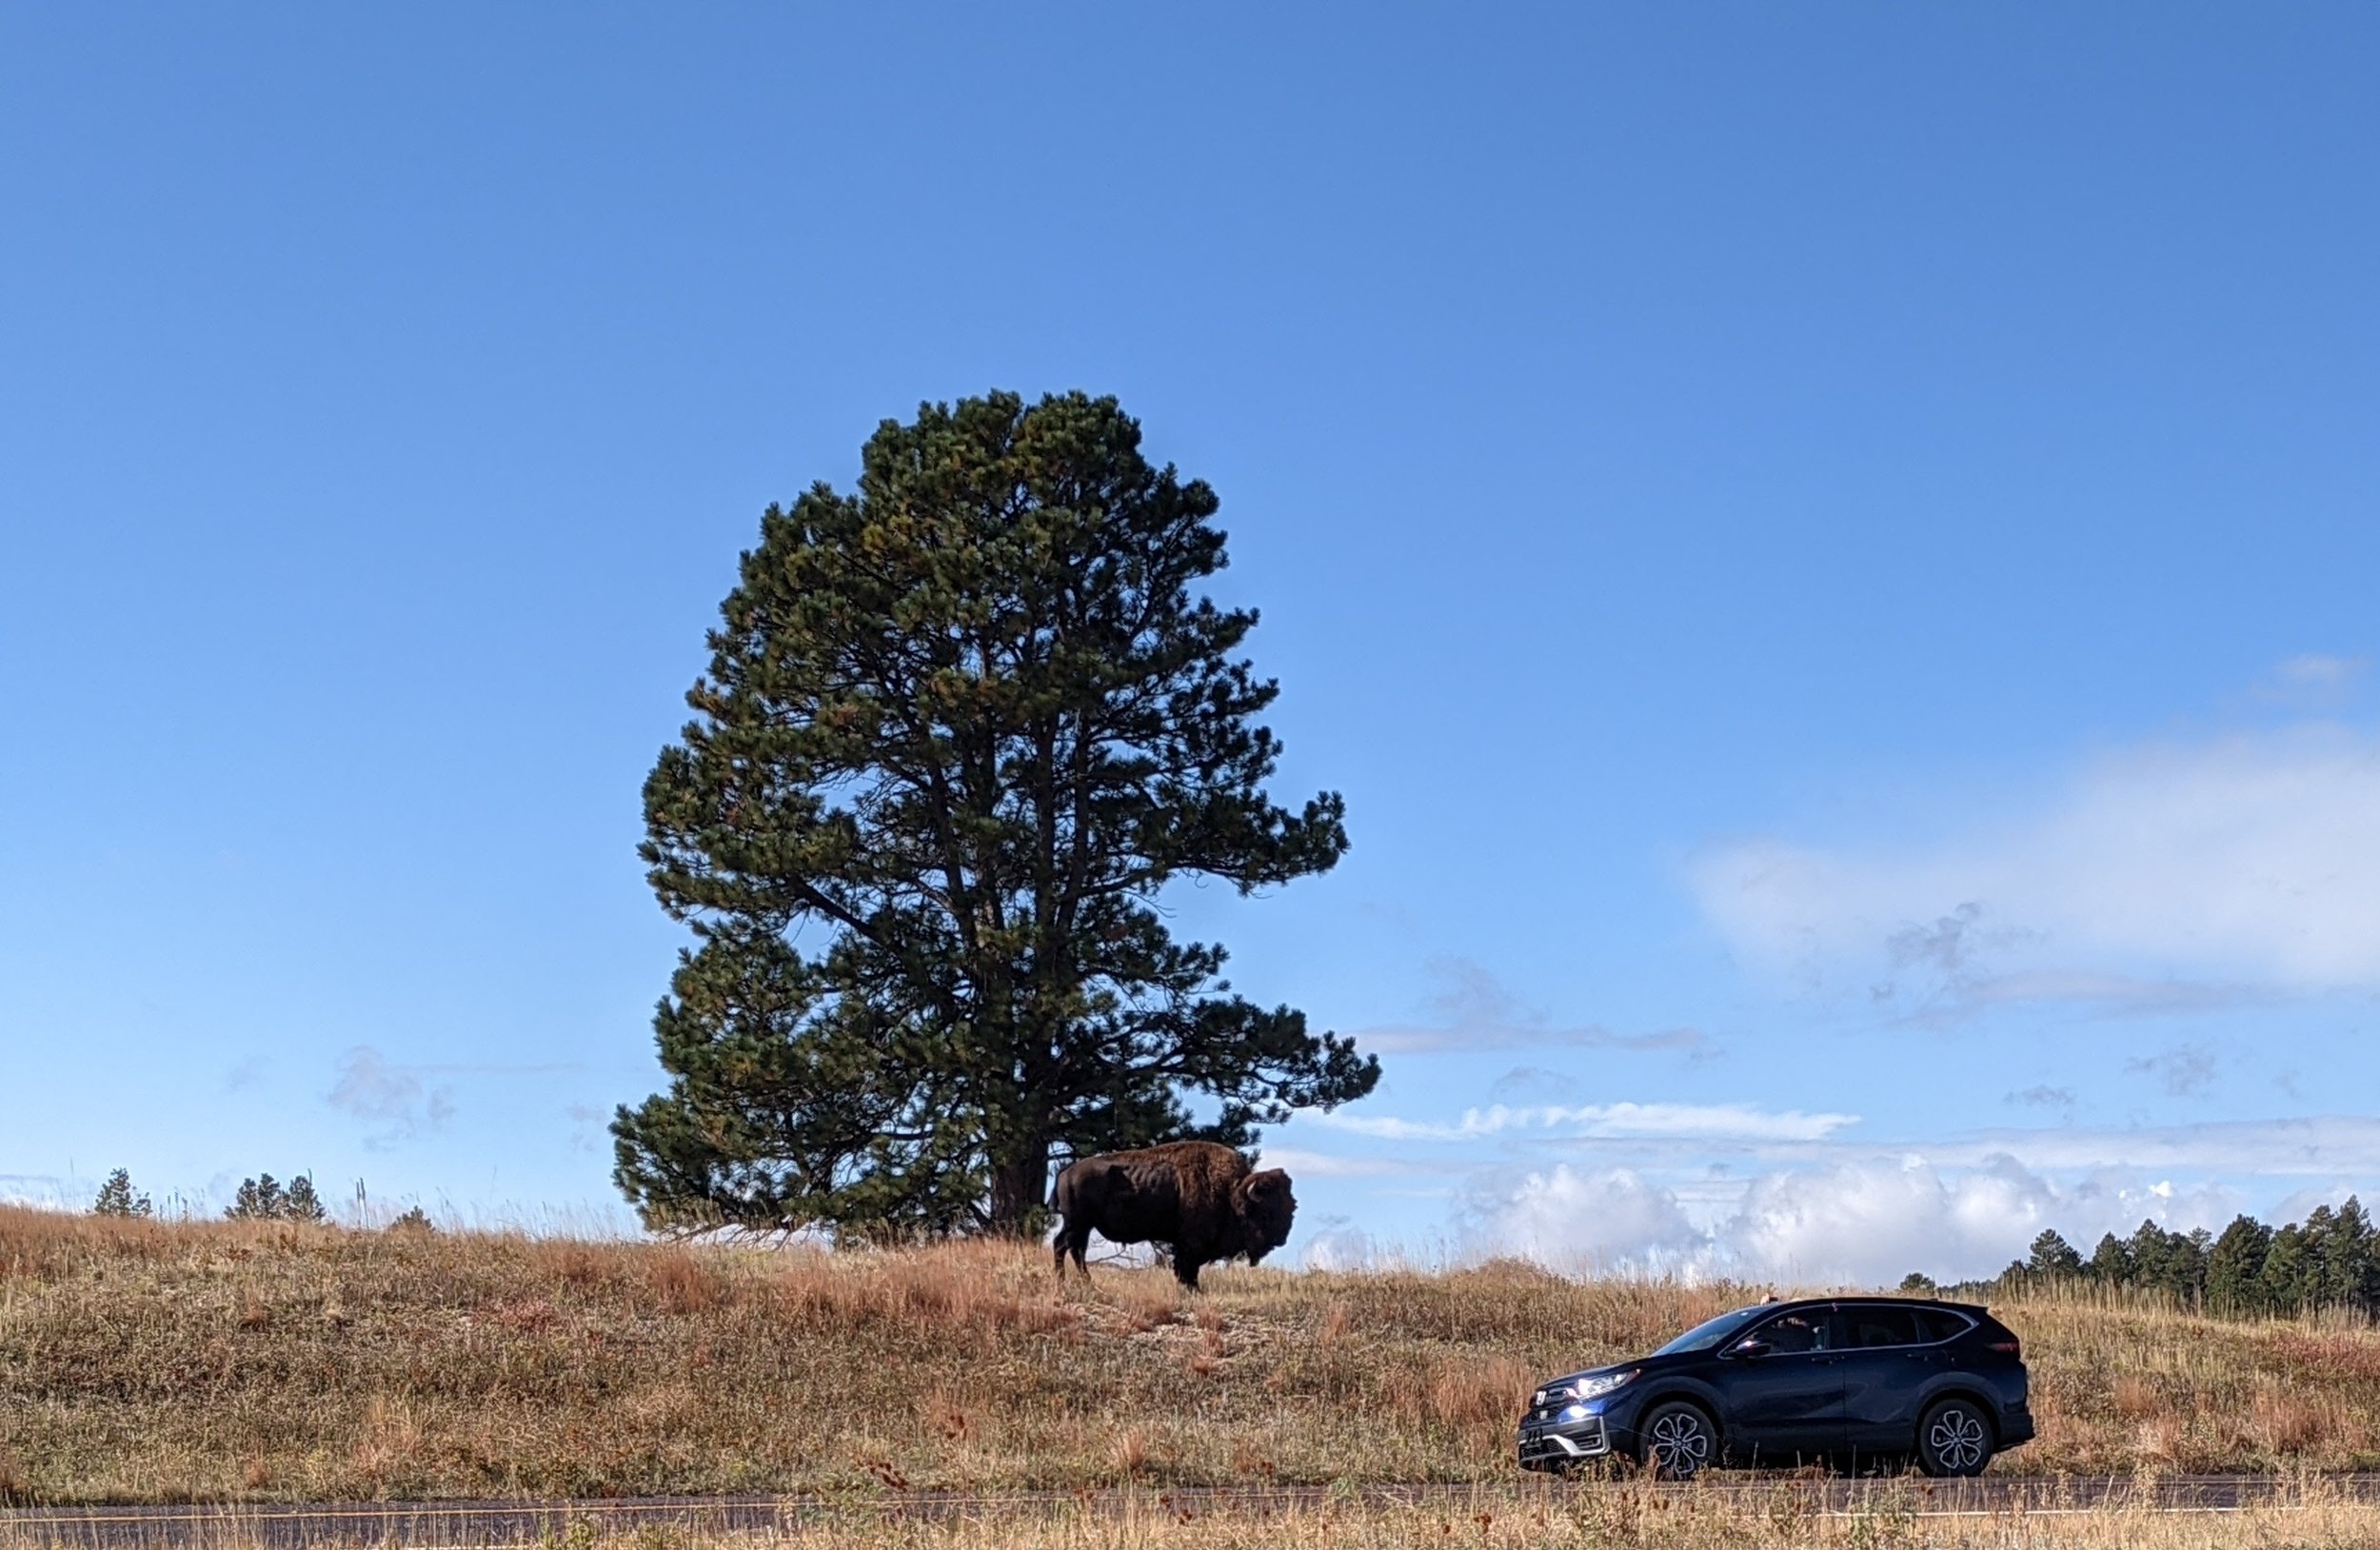  Very obliging bison posing by the road 